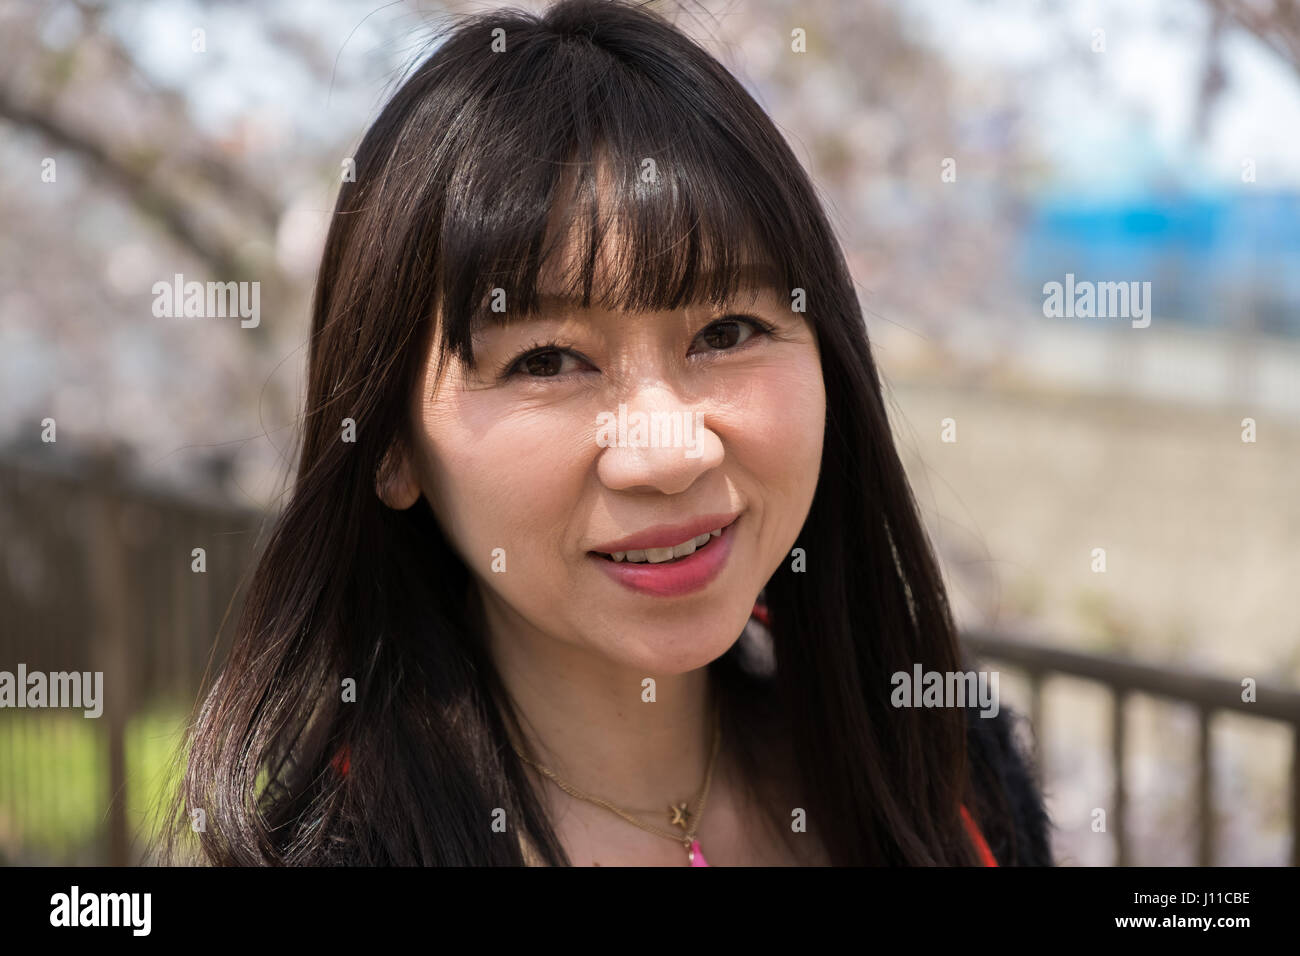 japanese-woman-with-a-smiling-face-J11CBE.jpg